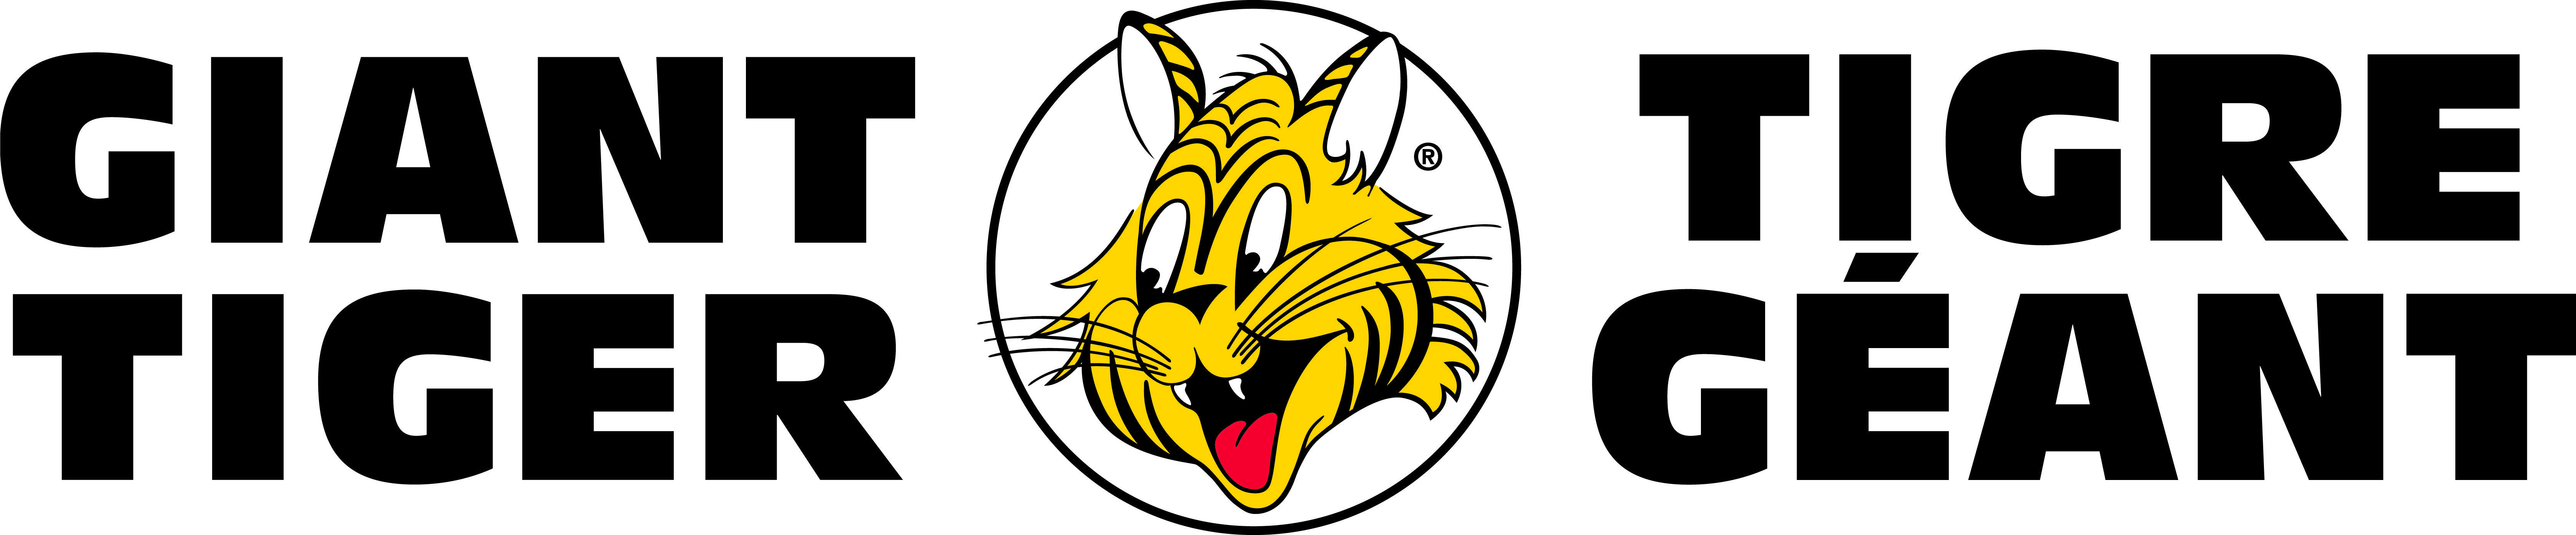 Yellow and Black Tiger Logo - Logos and Guidelines Room